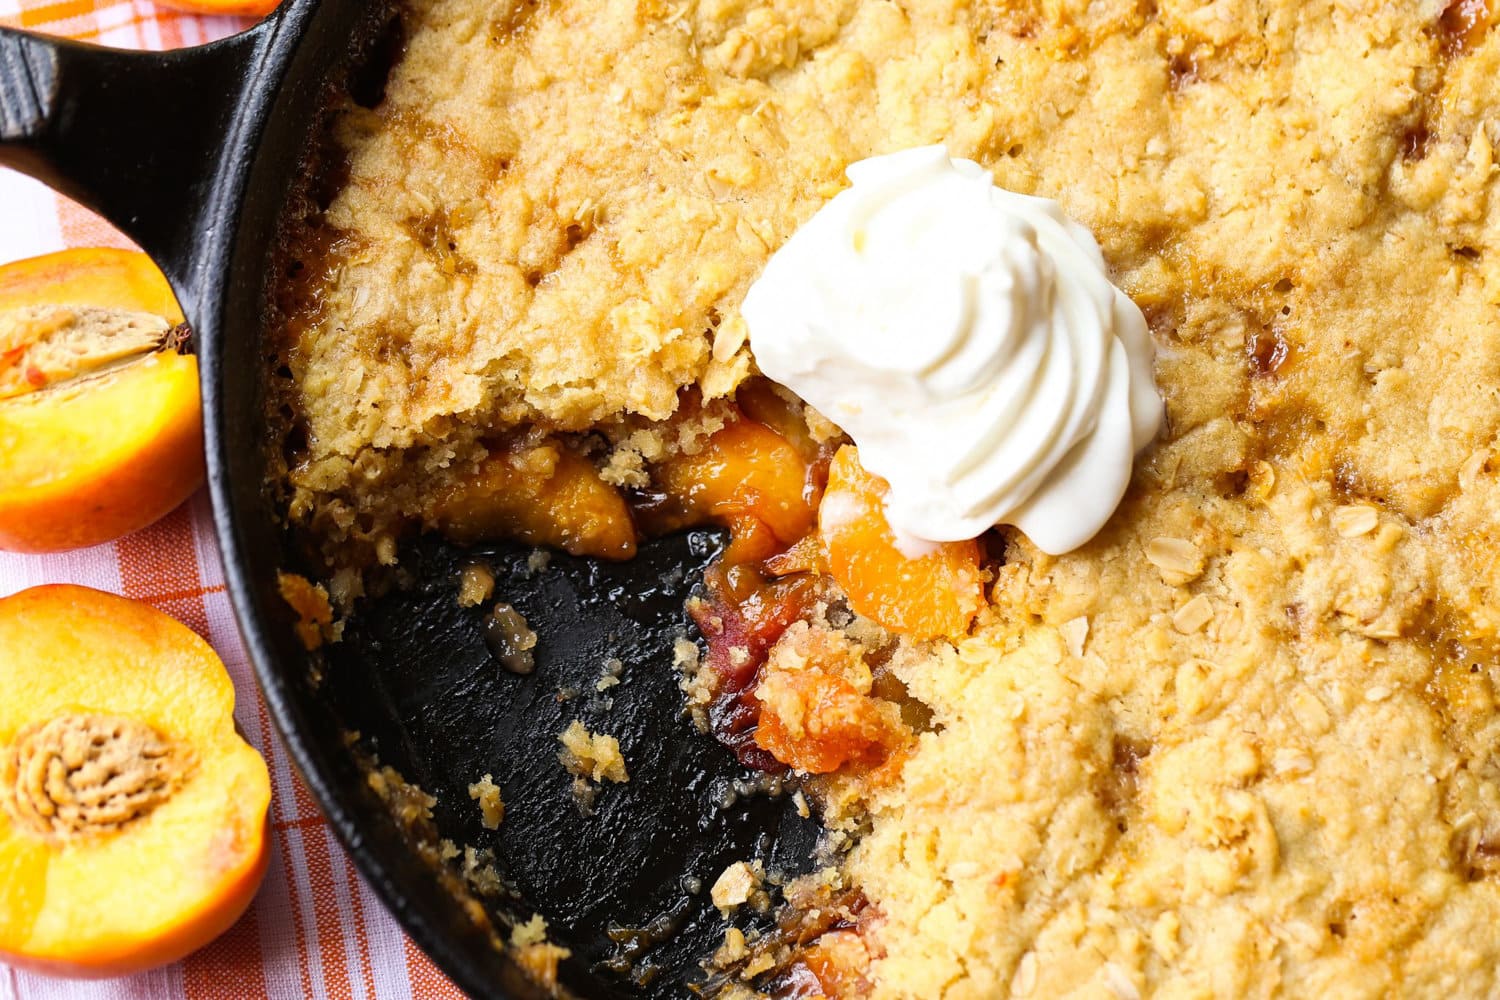 Skillet sugar cookie cobbler topped with whipped cream